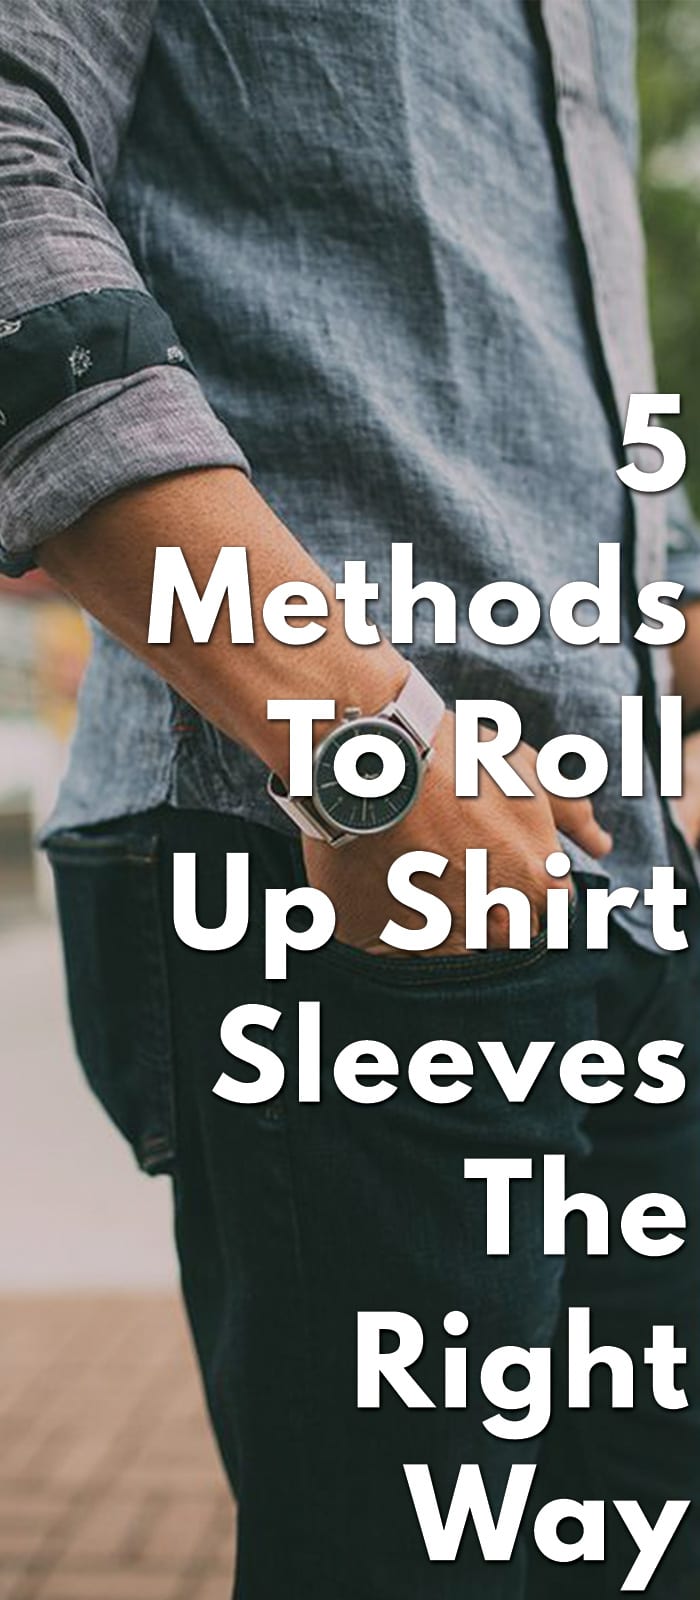 5-Methods-To-Roll-Up-Shirt-Sleeves-The-Right-Way